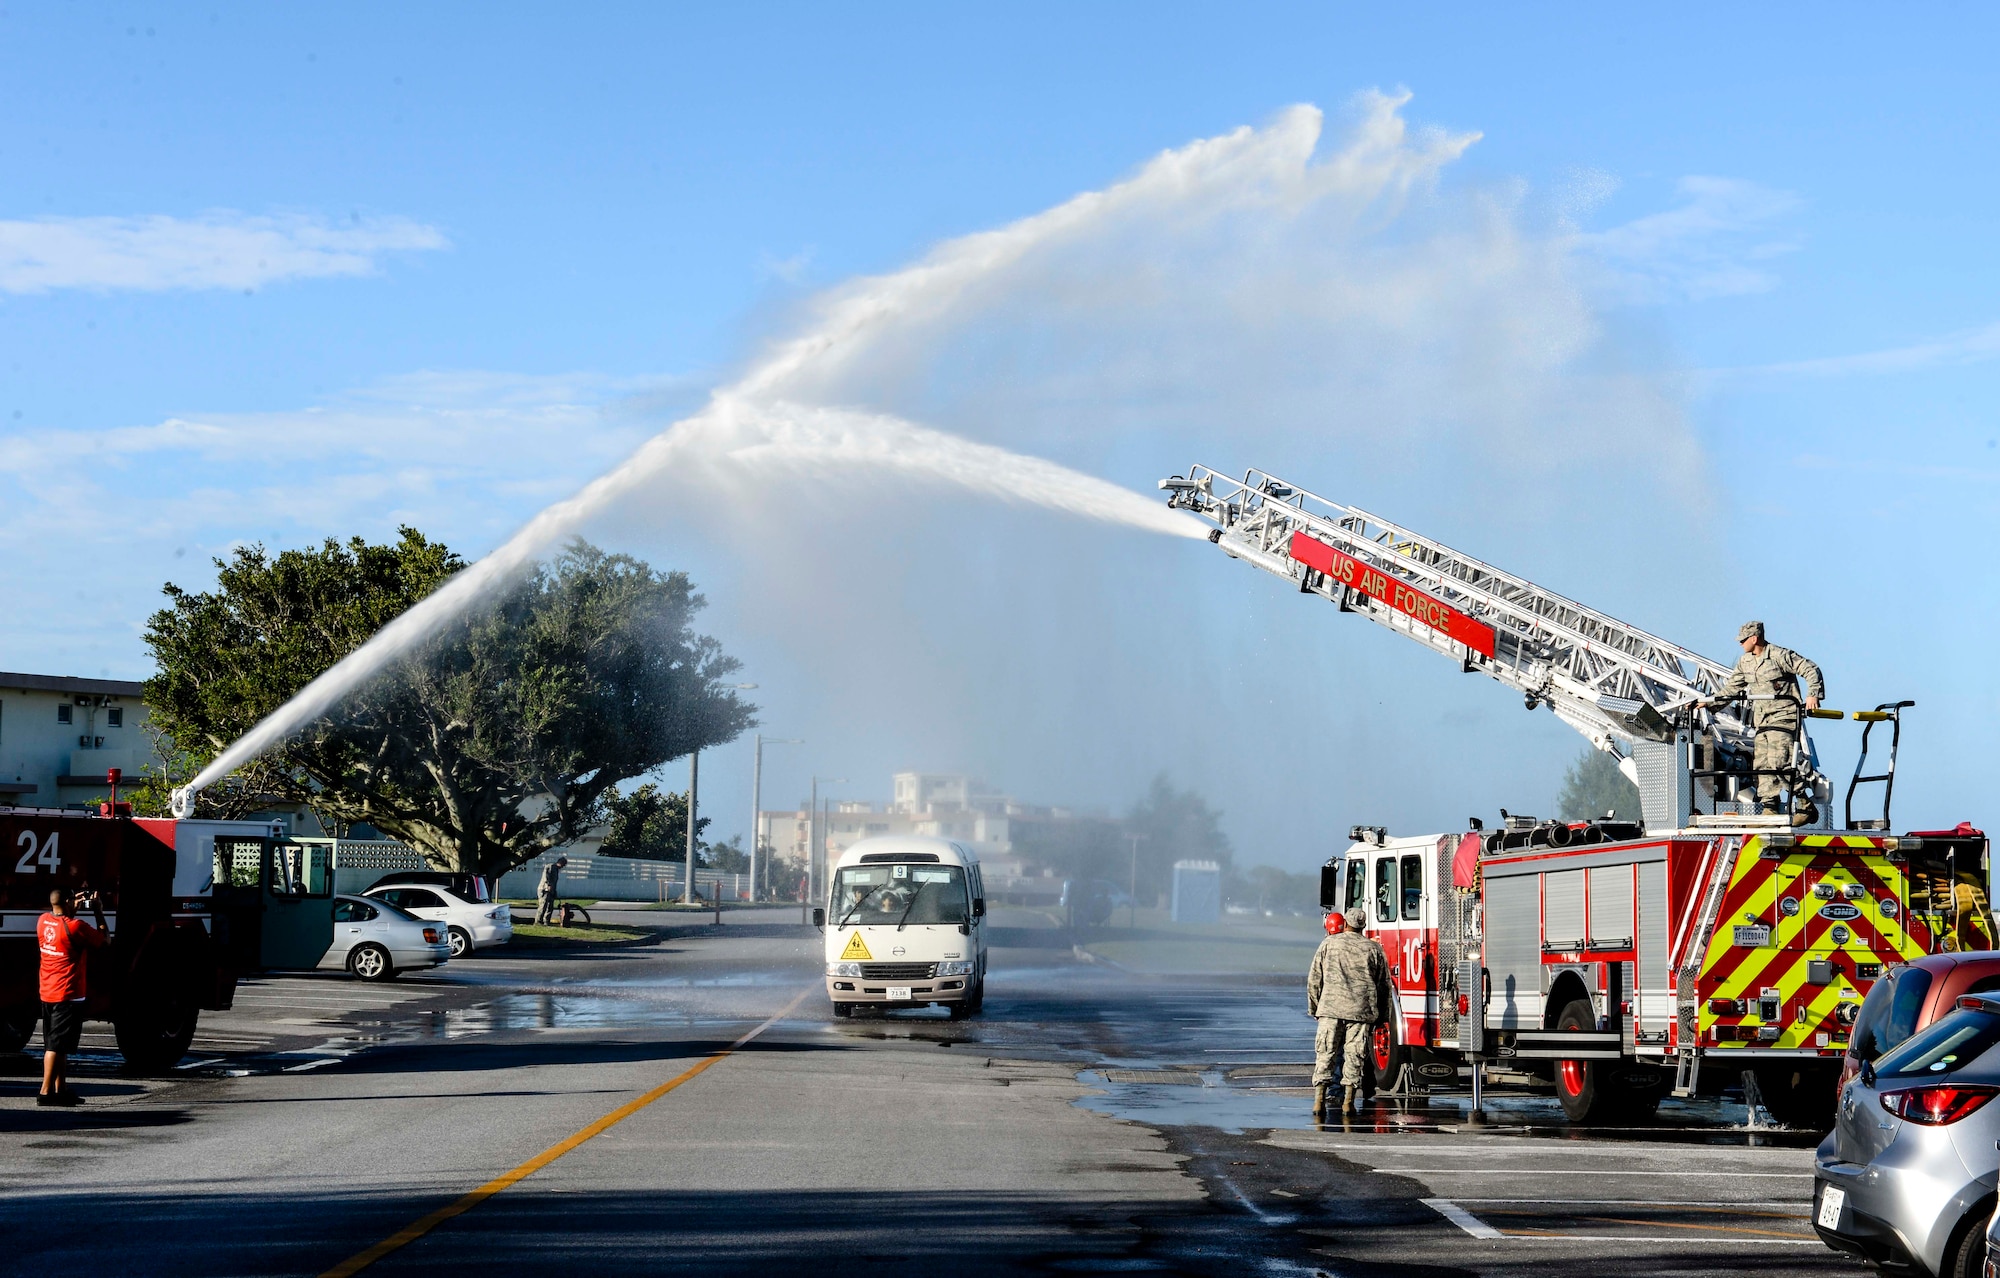 U.S. Air Force firefighters from the 18th Civil Engineer Squadron spray a water arch over a bus filled with Kadena Special Olympics athletes as they arrive at the Risner Fitness Center Sports Complex Nov. 7, 2015, at Kadena Air Base, Japan. The KSO began in 2000 with approximately 400 athletes and 600 volunteers as an 18th Wing community goodwill initiative to strengthen U.S. - Okinawa relationships. After 16 years, the event has more than doubled in size and participation. (U.S. Air Force photo by Senior Airman John Linzmeier/Released) 